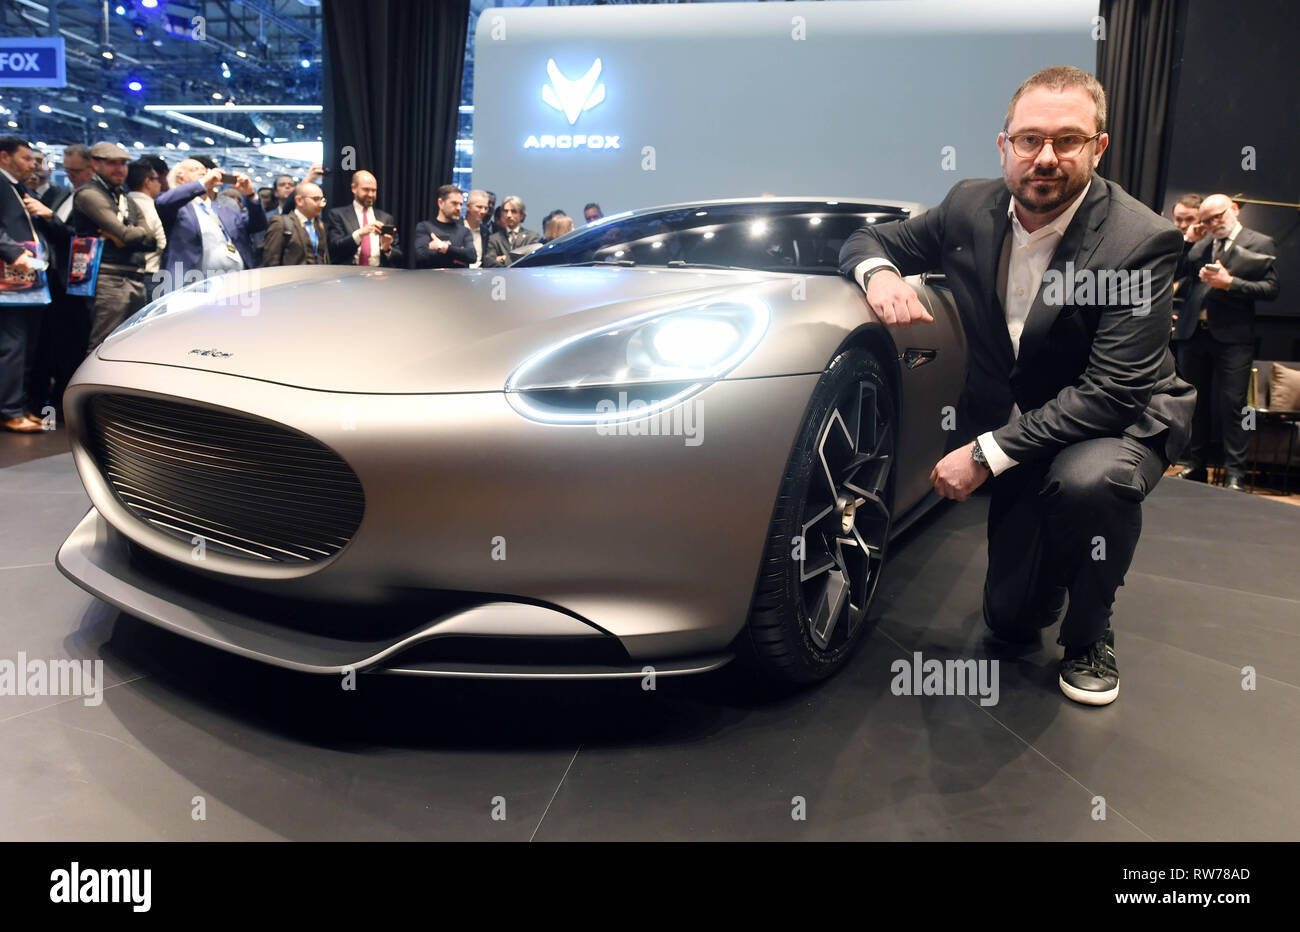 Genf, Switzerland. 05th Mar, 2019. Anton Piech, Managing Director of Piech Automotive and a son of former VW boss Ferdinand Piech, presents the electrically powered Piech Mark Zero sports car at the Geneva Motor Show on the first press day. The 89th Geneva Motor Show starts on 7 March and lasts until 17 March. Credit: Uli Deck/dpa/Alamy Live News Stock Photo